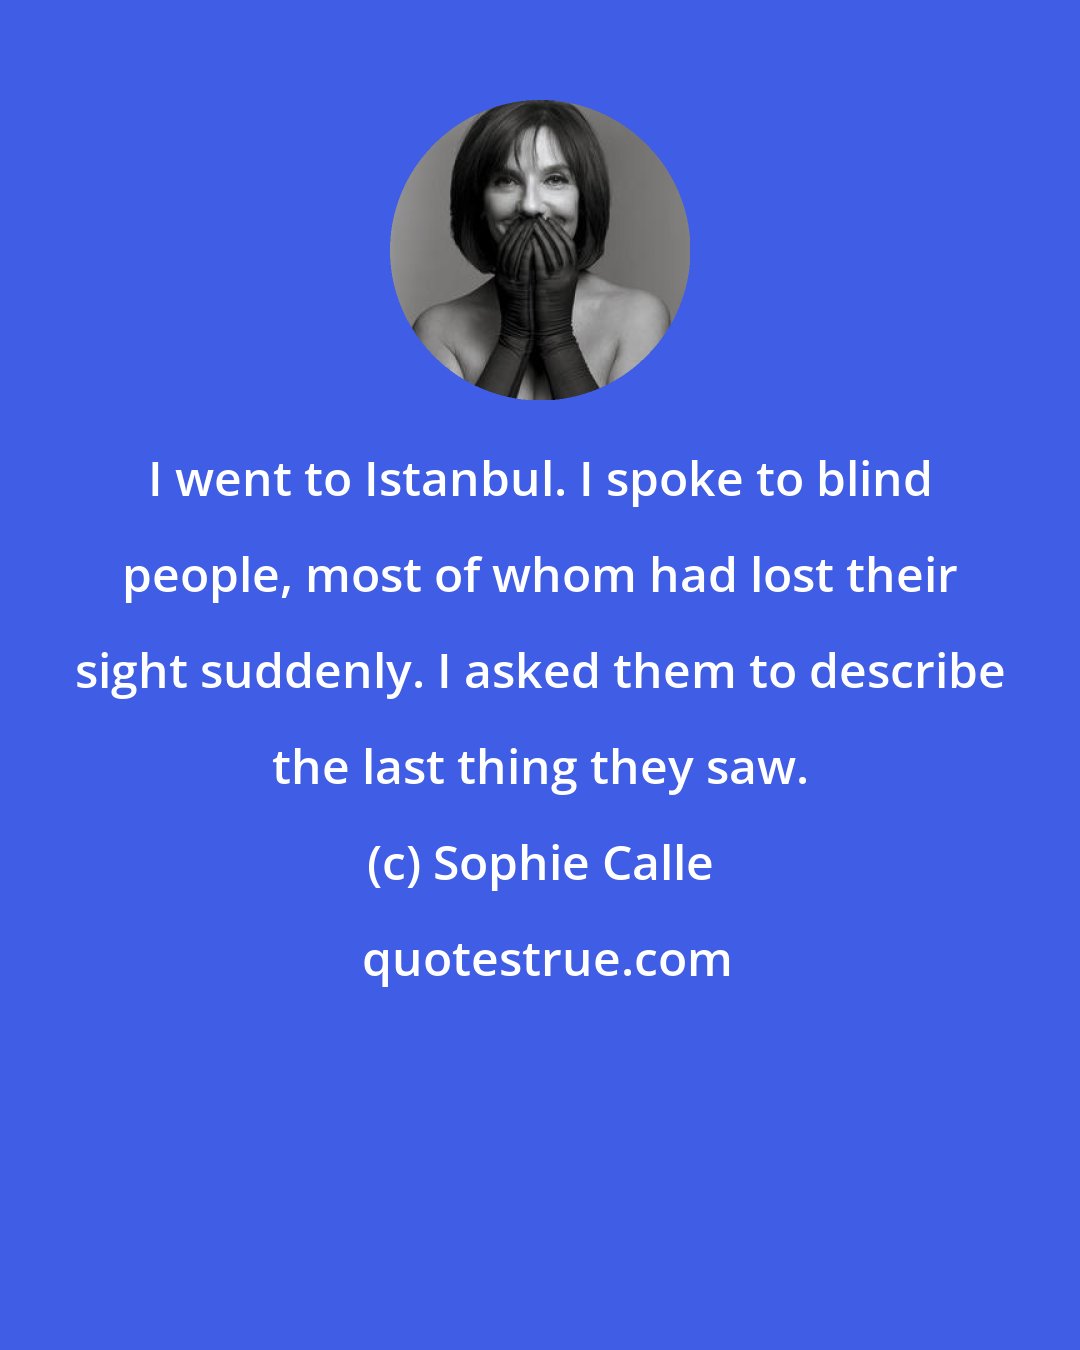 Sophie Calle: I went to Istanbul. I spoke to blind people, most of whom had lost their sight suddenly. I asked them to describe the last thing they saw.